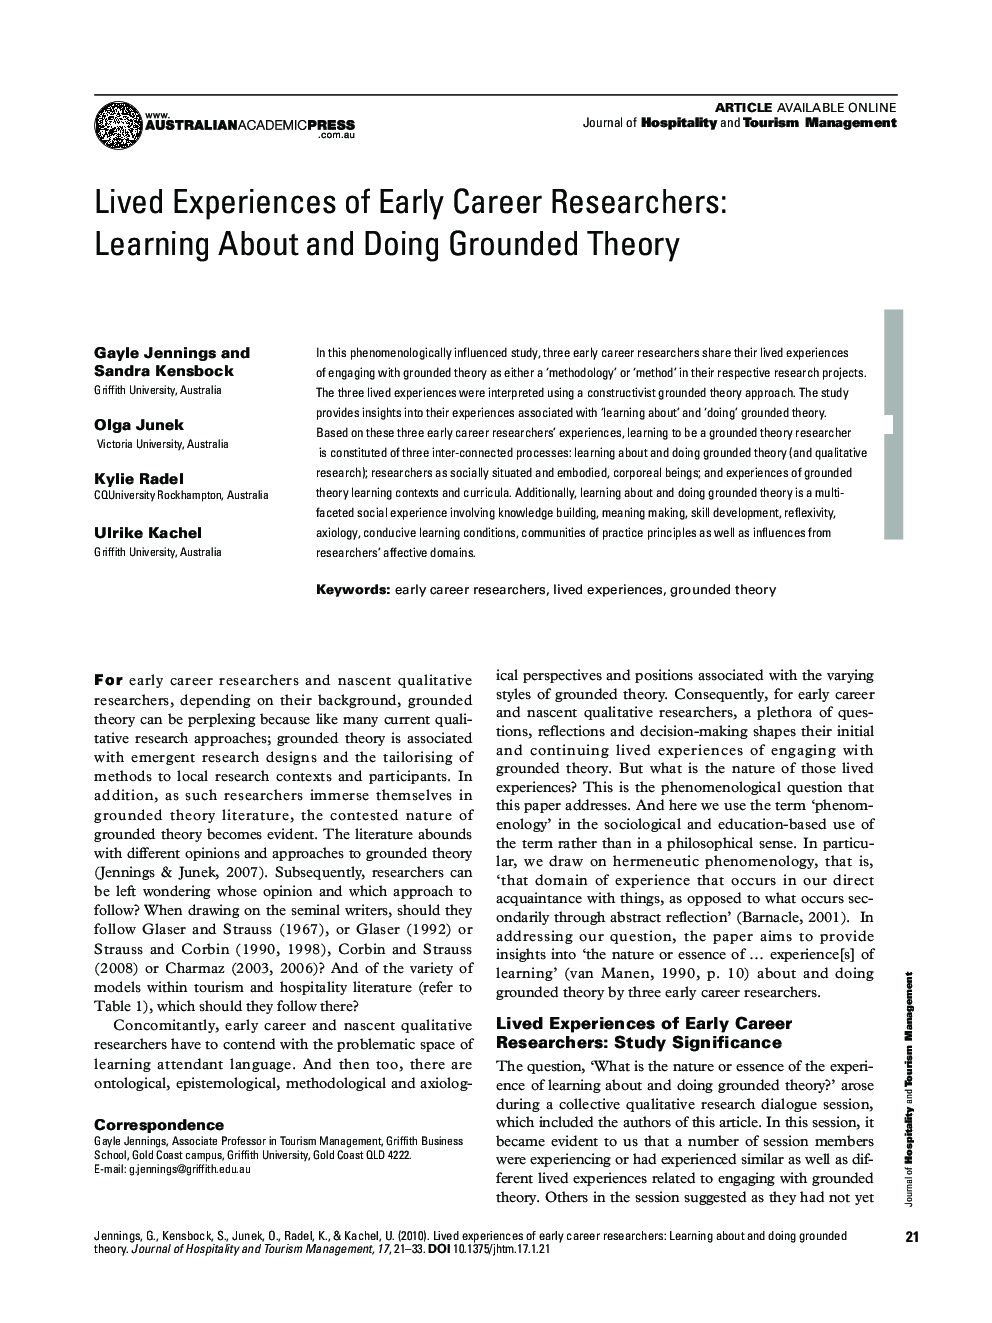 Lived Experiences of Early Career Researchers: Learning About and Doing Grounded Theory